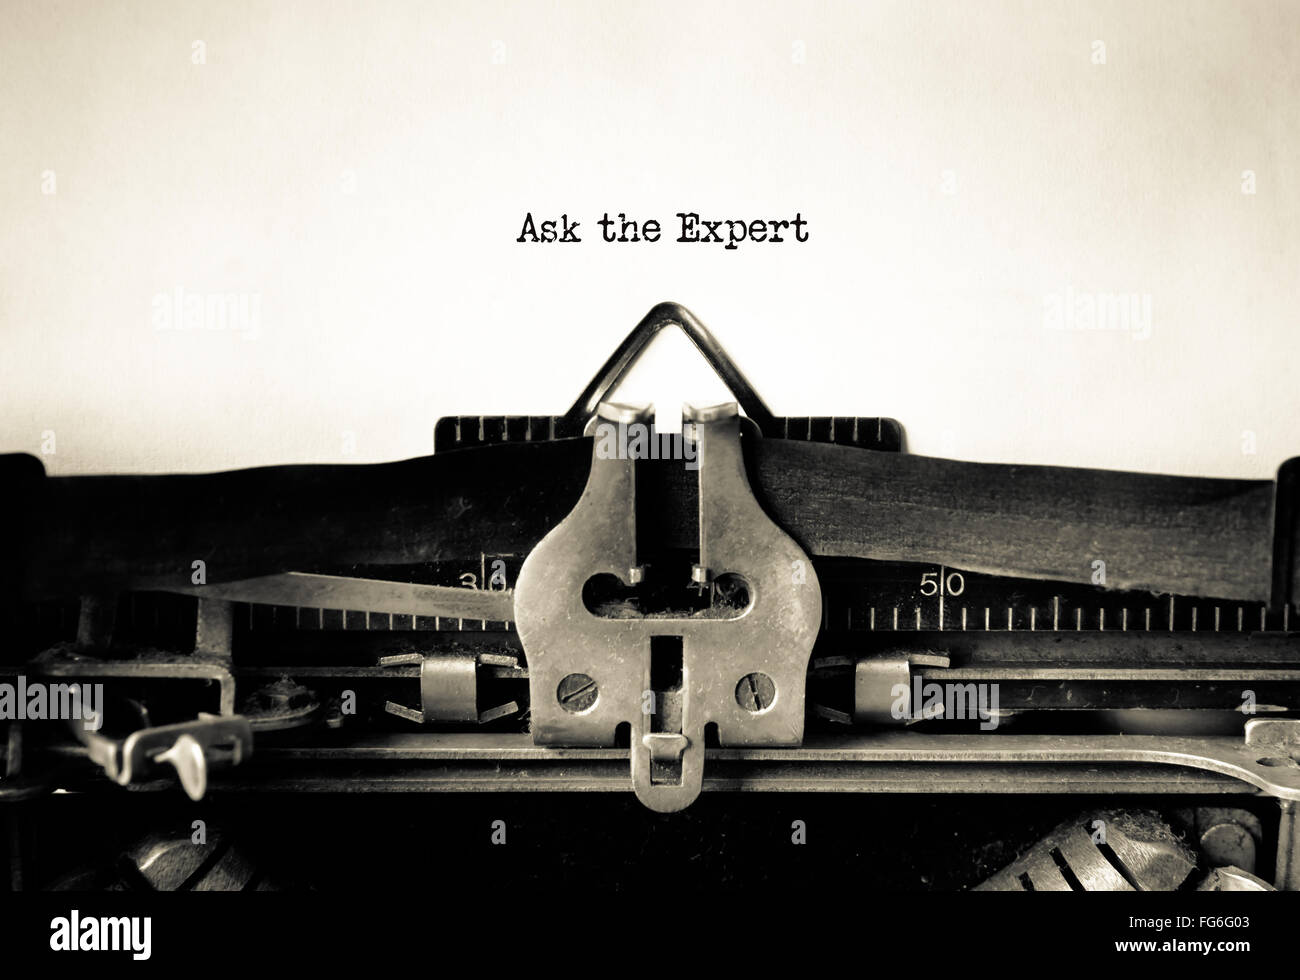 Ask the Expert message typed on vintage typewriter Stock Photo